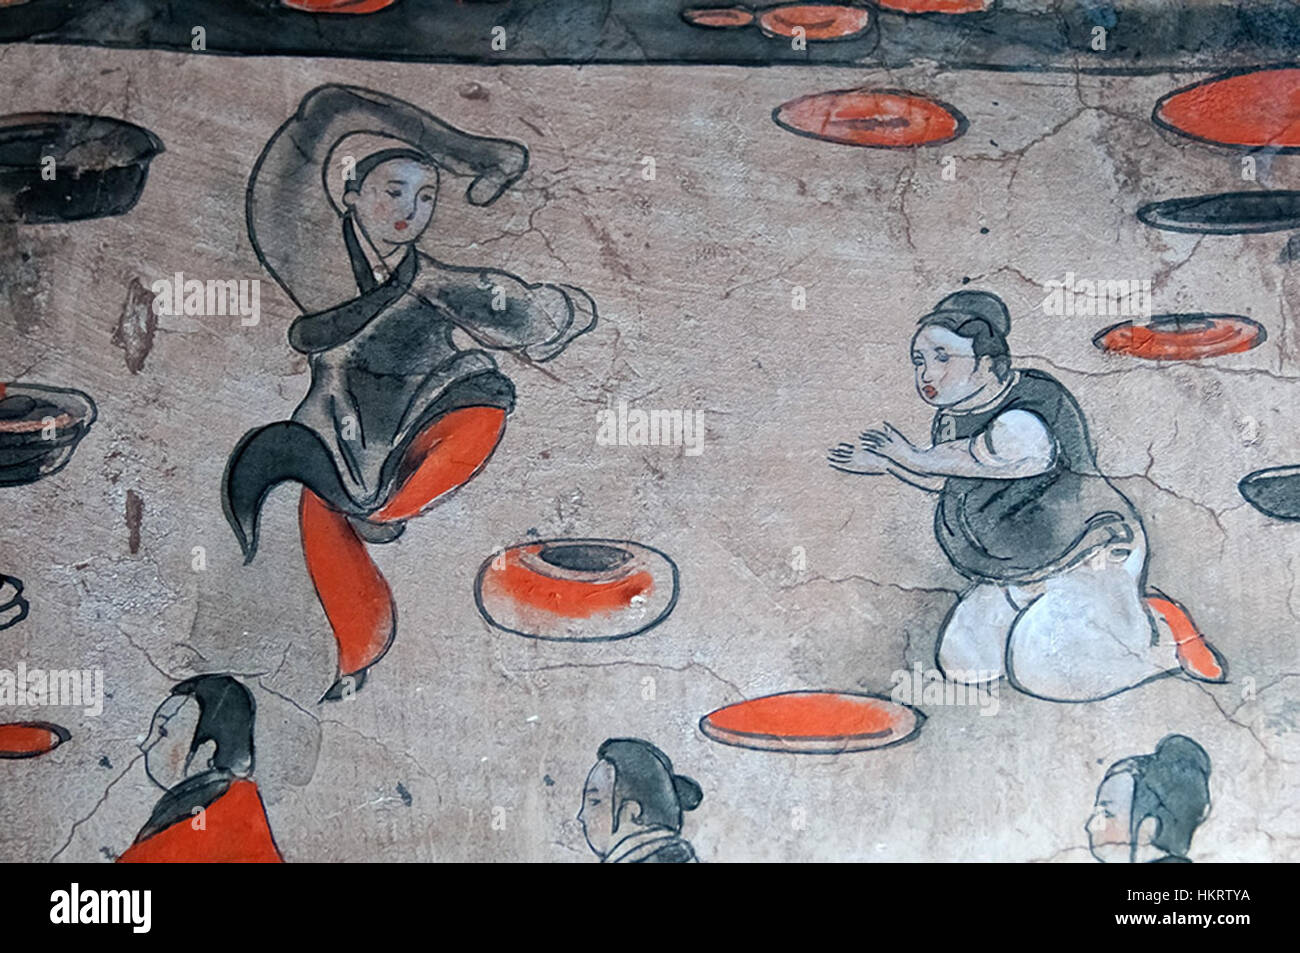 Dahuting tomb mural detail of a dancer, Eastern Han Dynasty Stock Photo